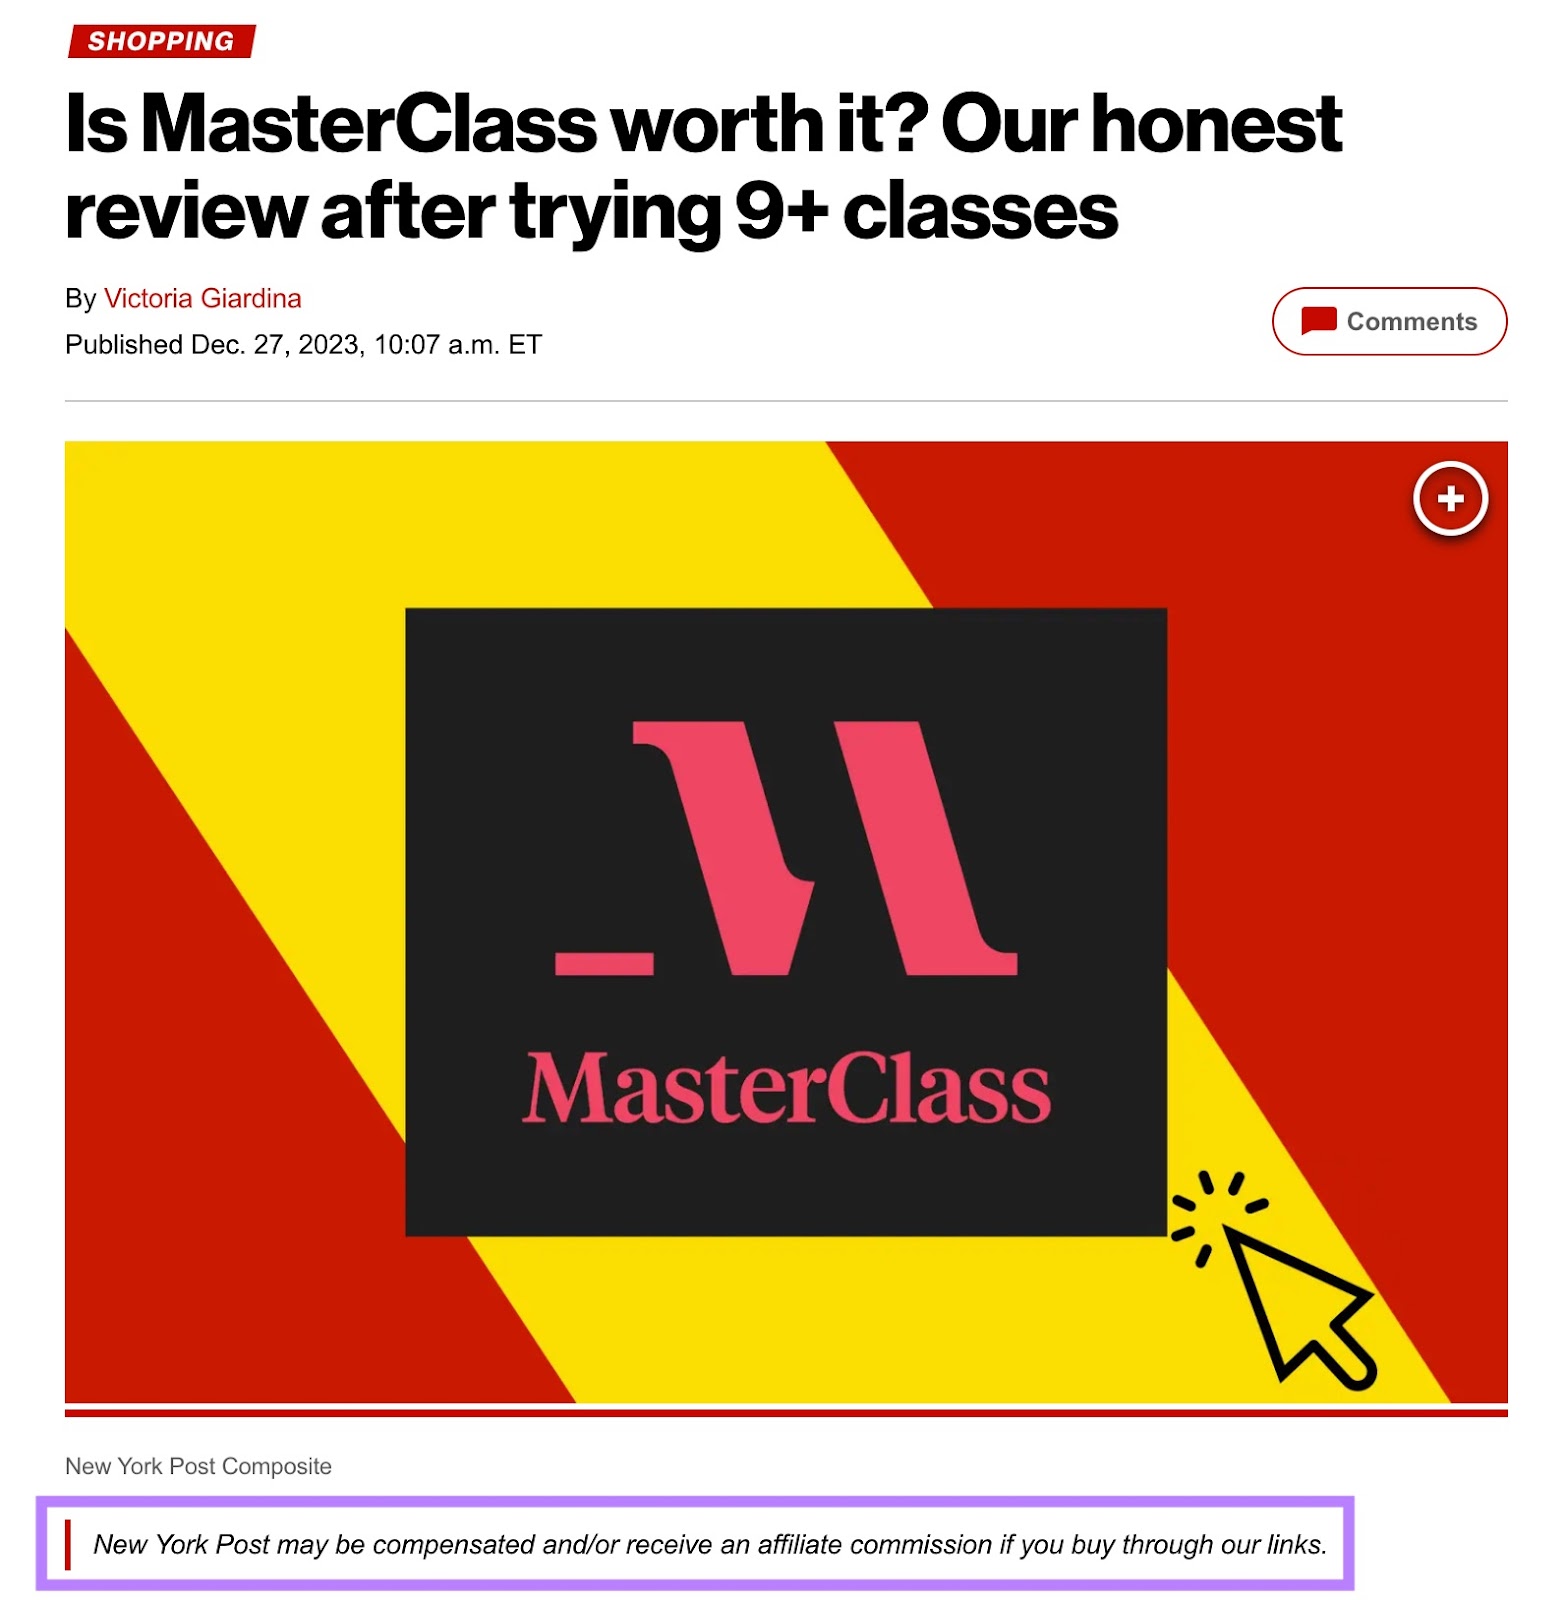 An article on the New York Post reviewing an online education platform MasterClass with the affiliate disclosure highlighted.